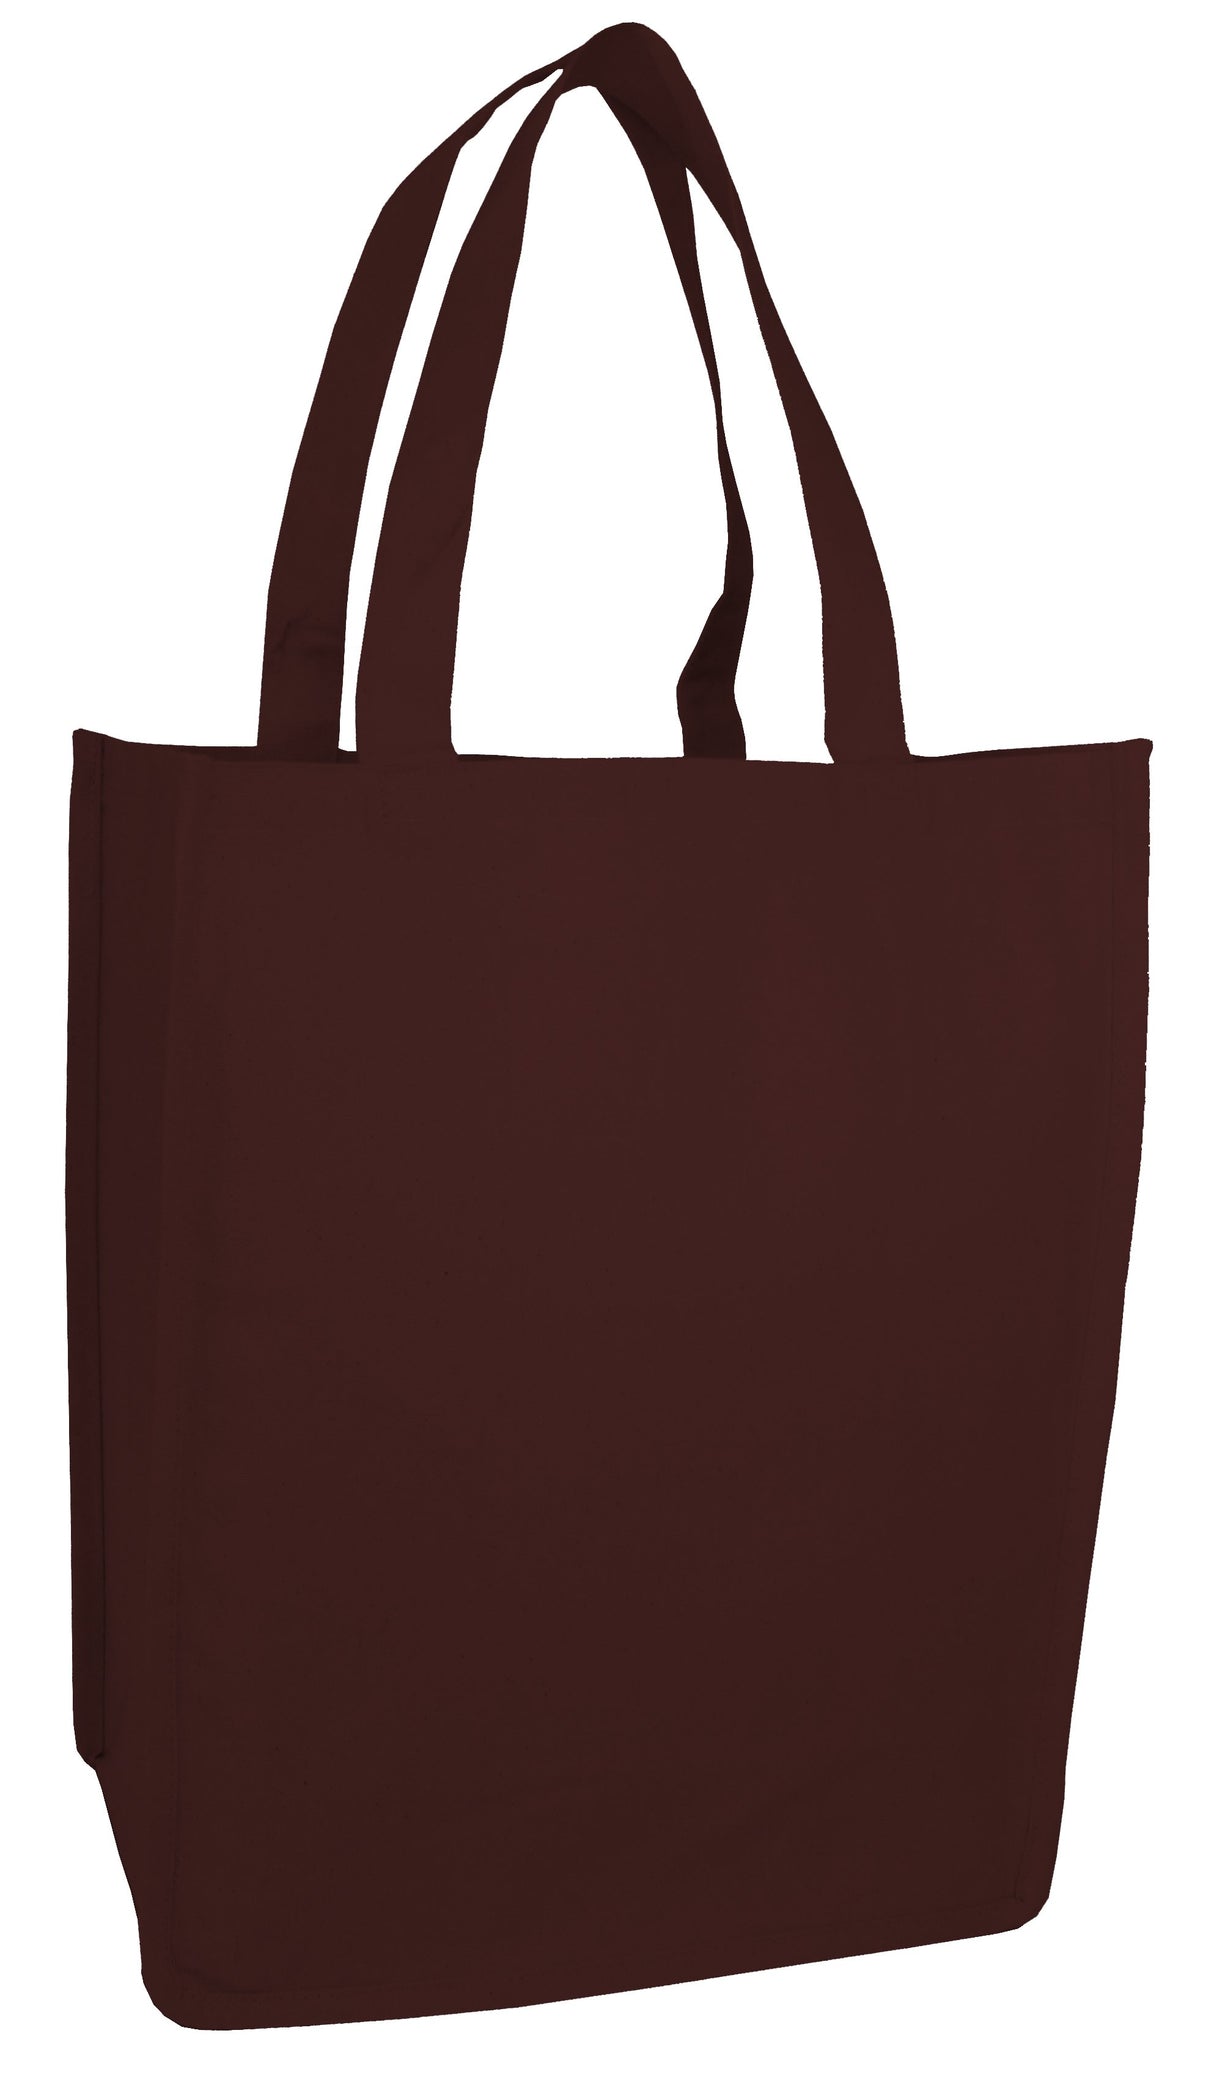 72 ct Jumbo Size Heavy Canvas Wide Shopper Tote Bag - By Case